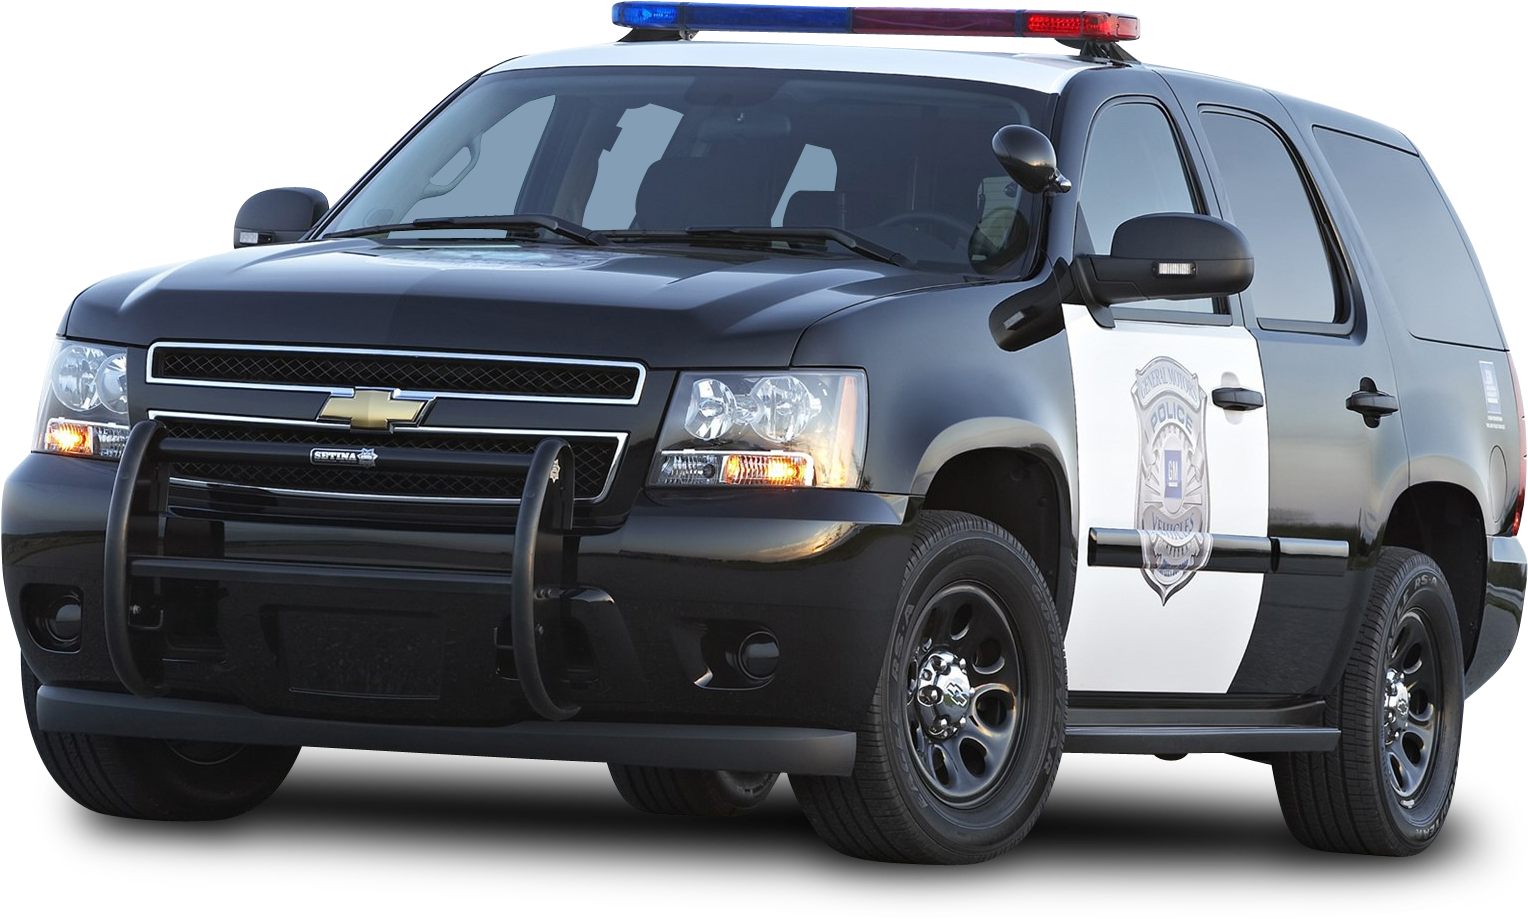 Black Chevy Tahoe Police Suv Ppv Car - Police Car Transparent Background (1704x1032)